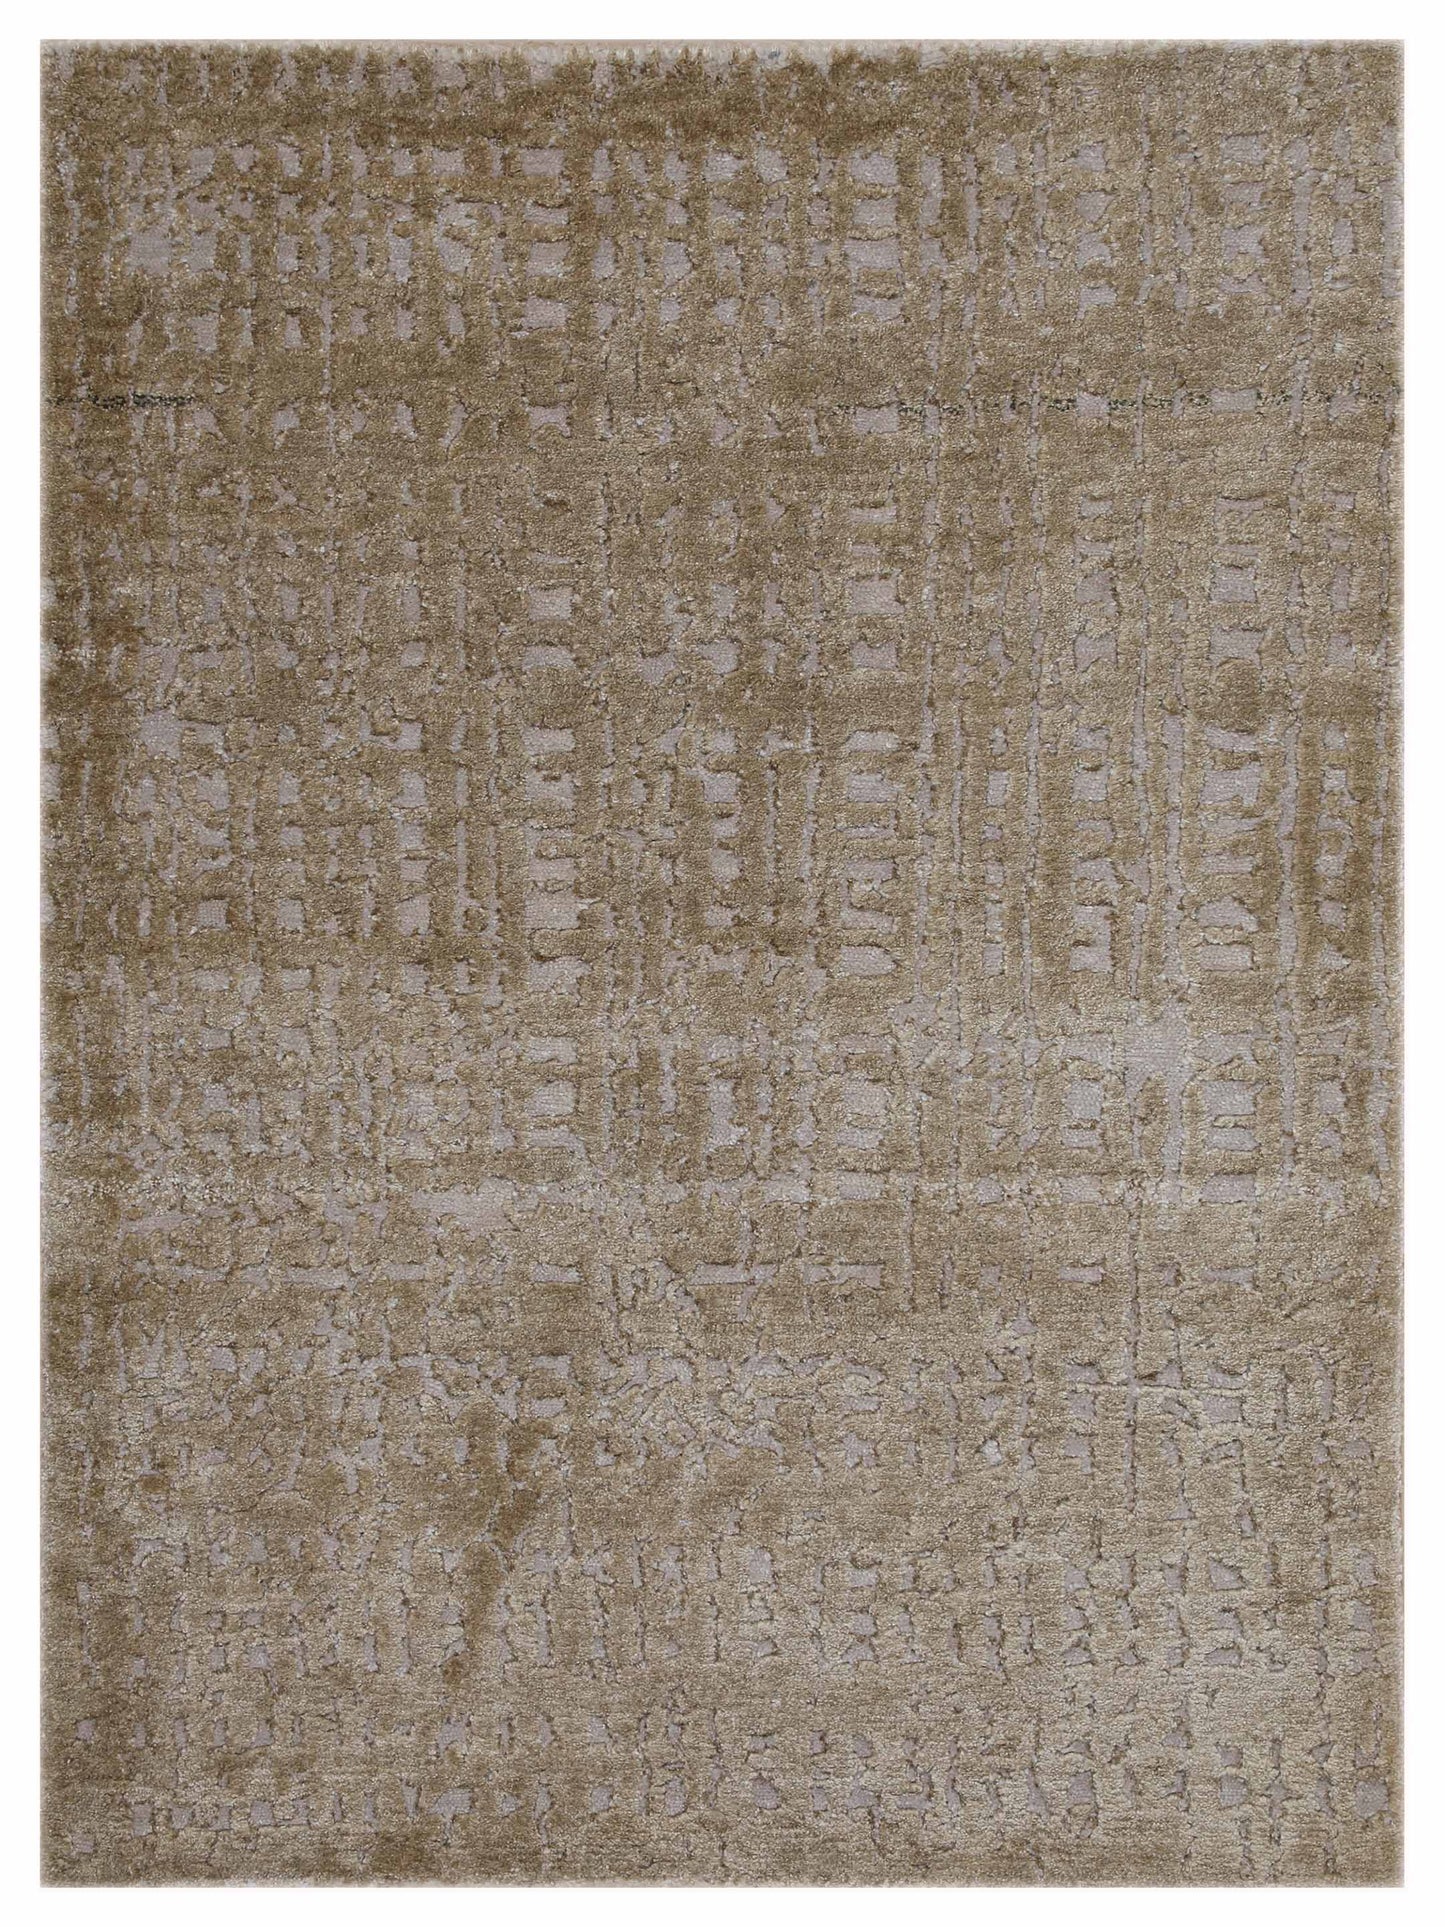 Artisan Mary MN-356 Beige Contemporary Knotted Rug